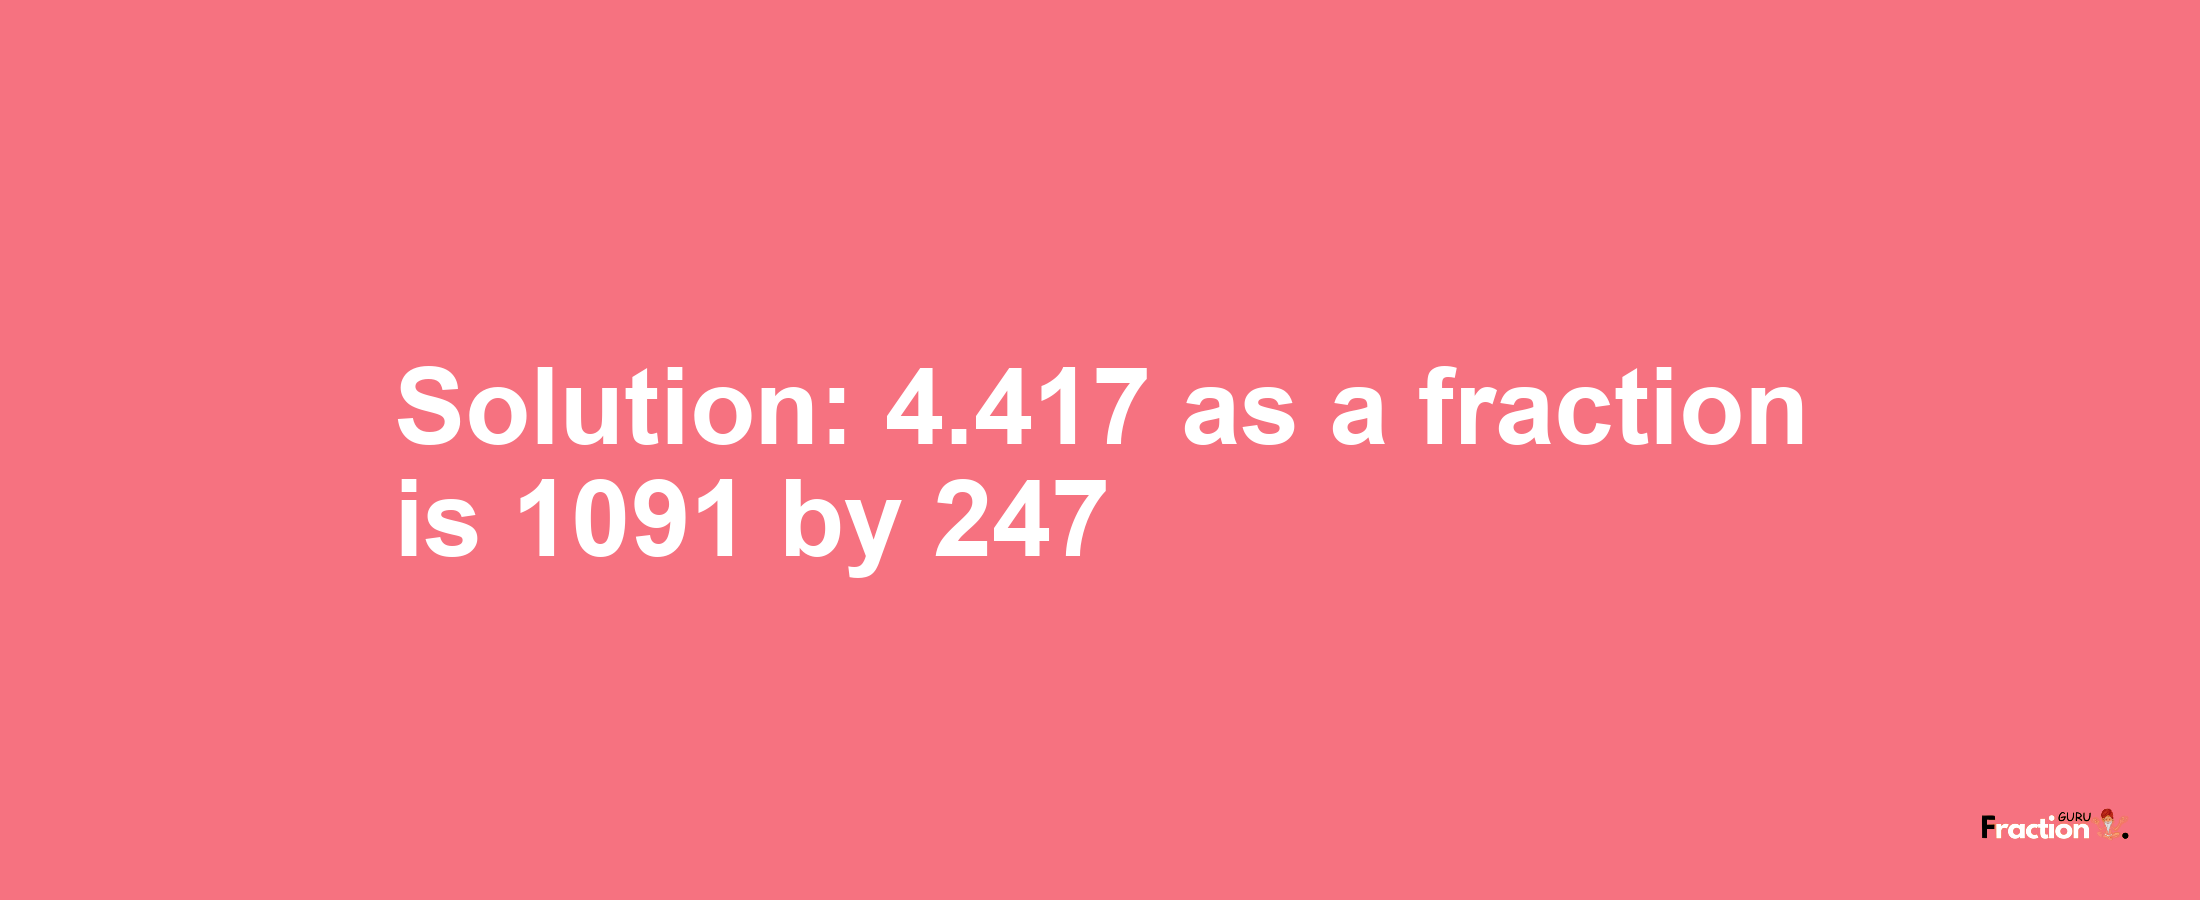 Solution:4.417 as a fraction is 1091/247